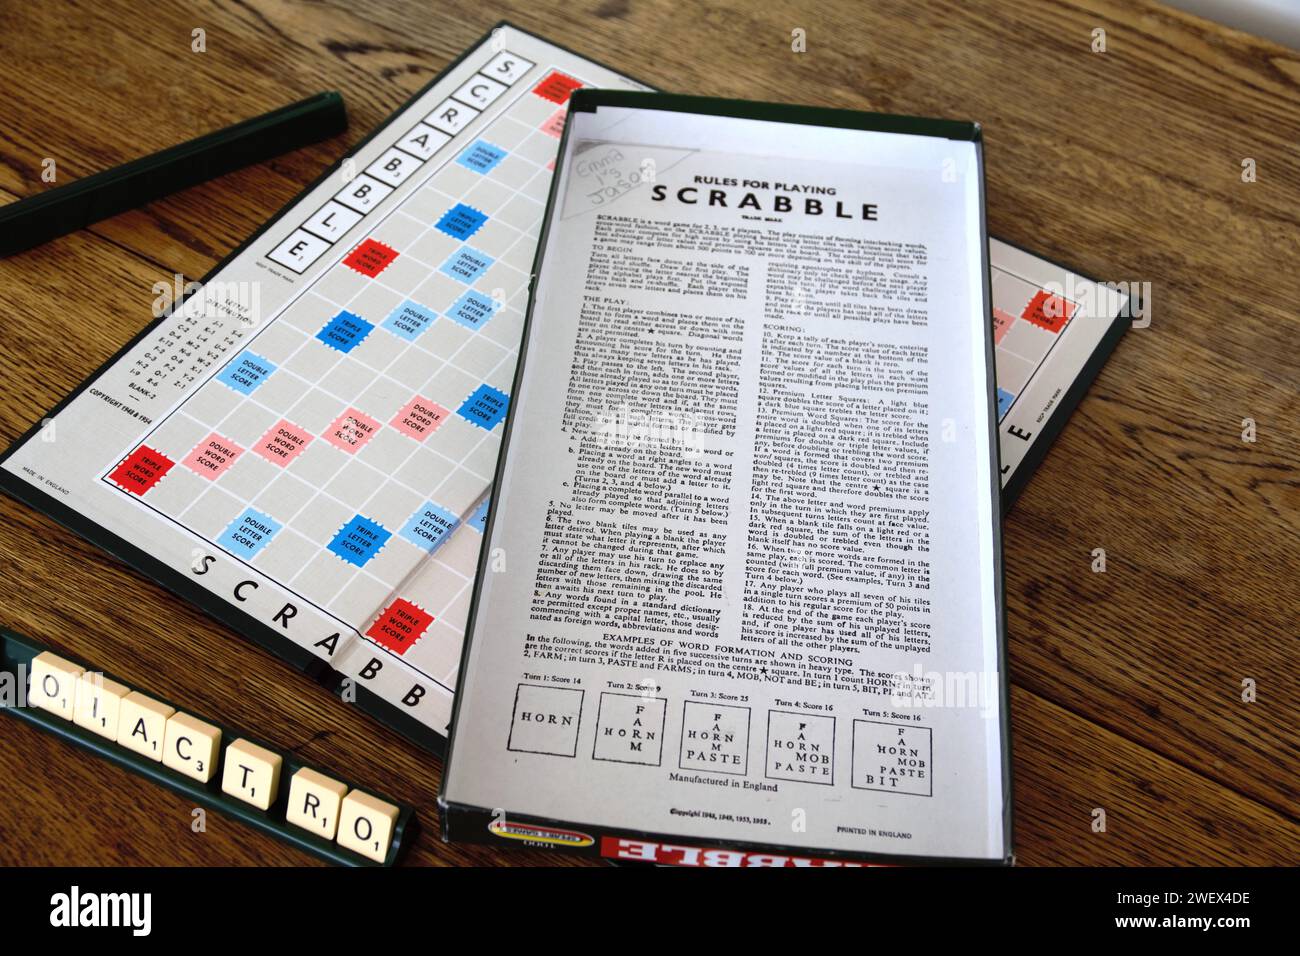 Scrabble board game. Spelling word play, making words out of tiles on square board to win points. Classic, retro family activity for adults and child Stock Photo